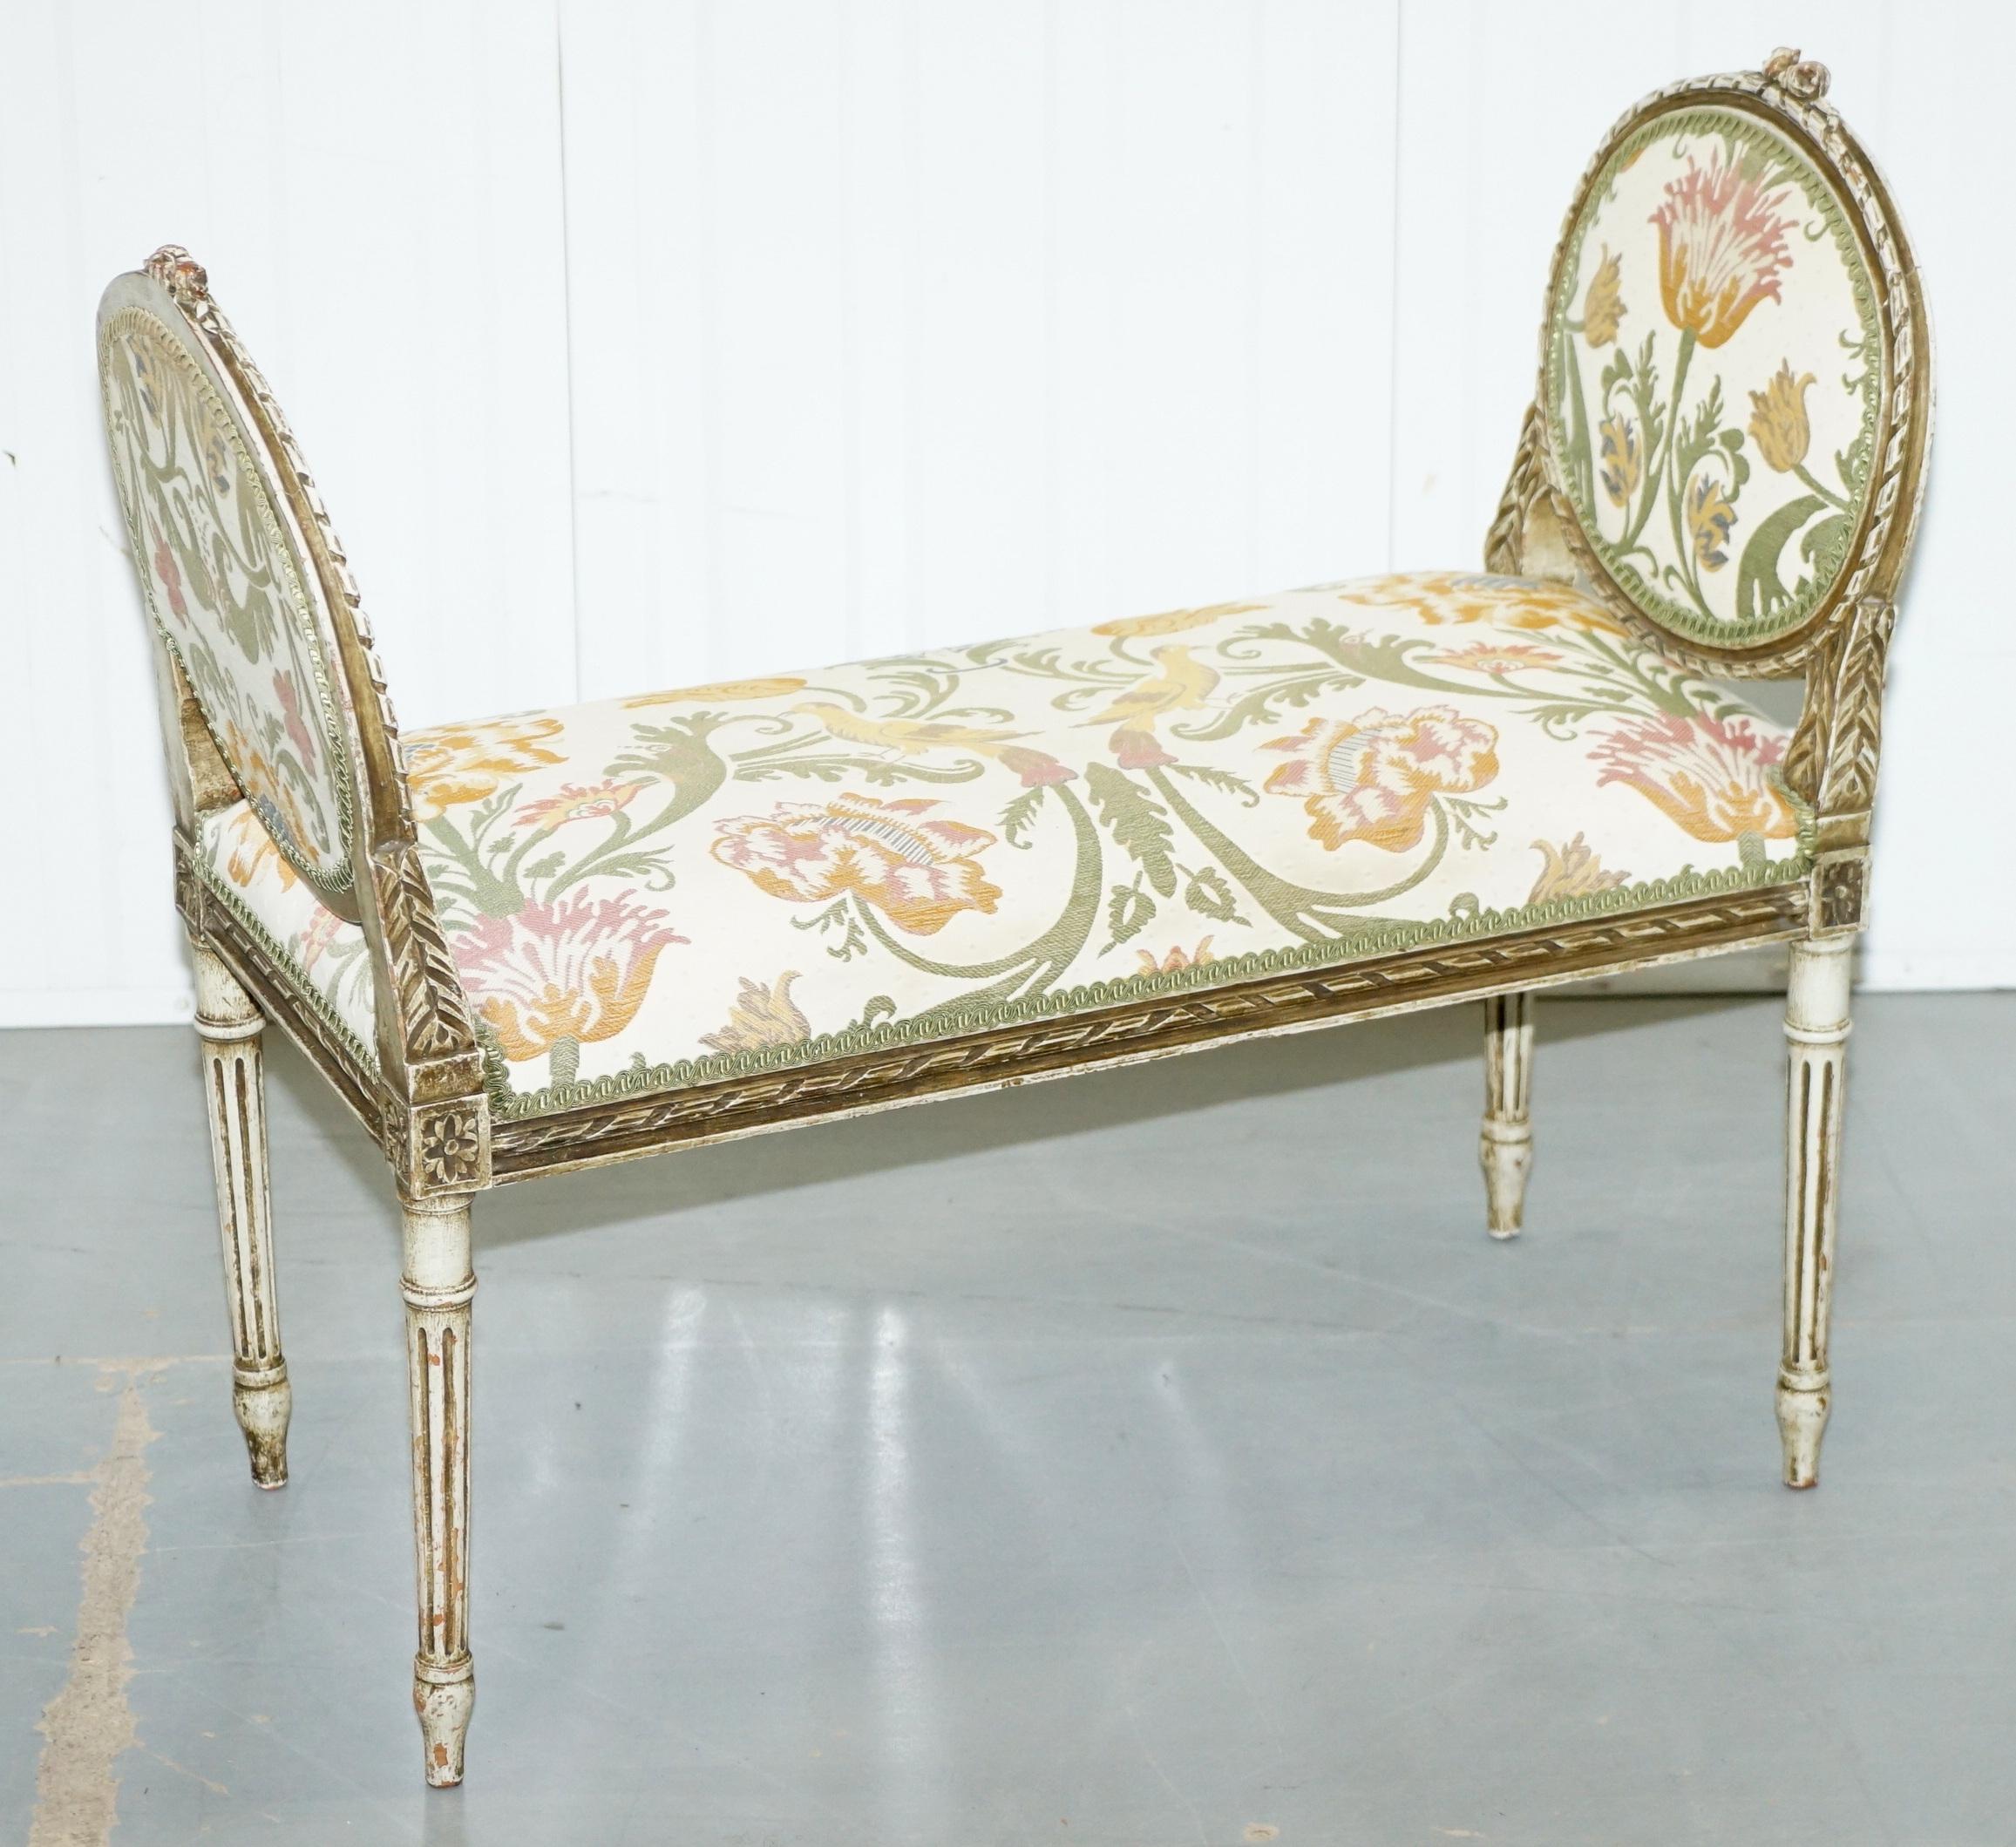 We are delighted to offer for sale this stunning Luxury hand painted French Louis XVI style Renaissance revival window seat

A truly stunning piece, the entire frame is hand carved from top to bottom back to front, it’s a very decorative, the